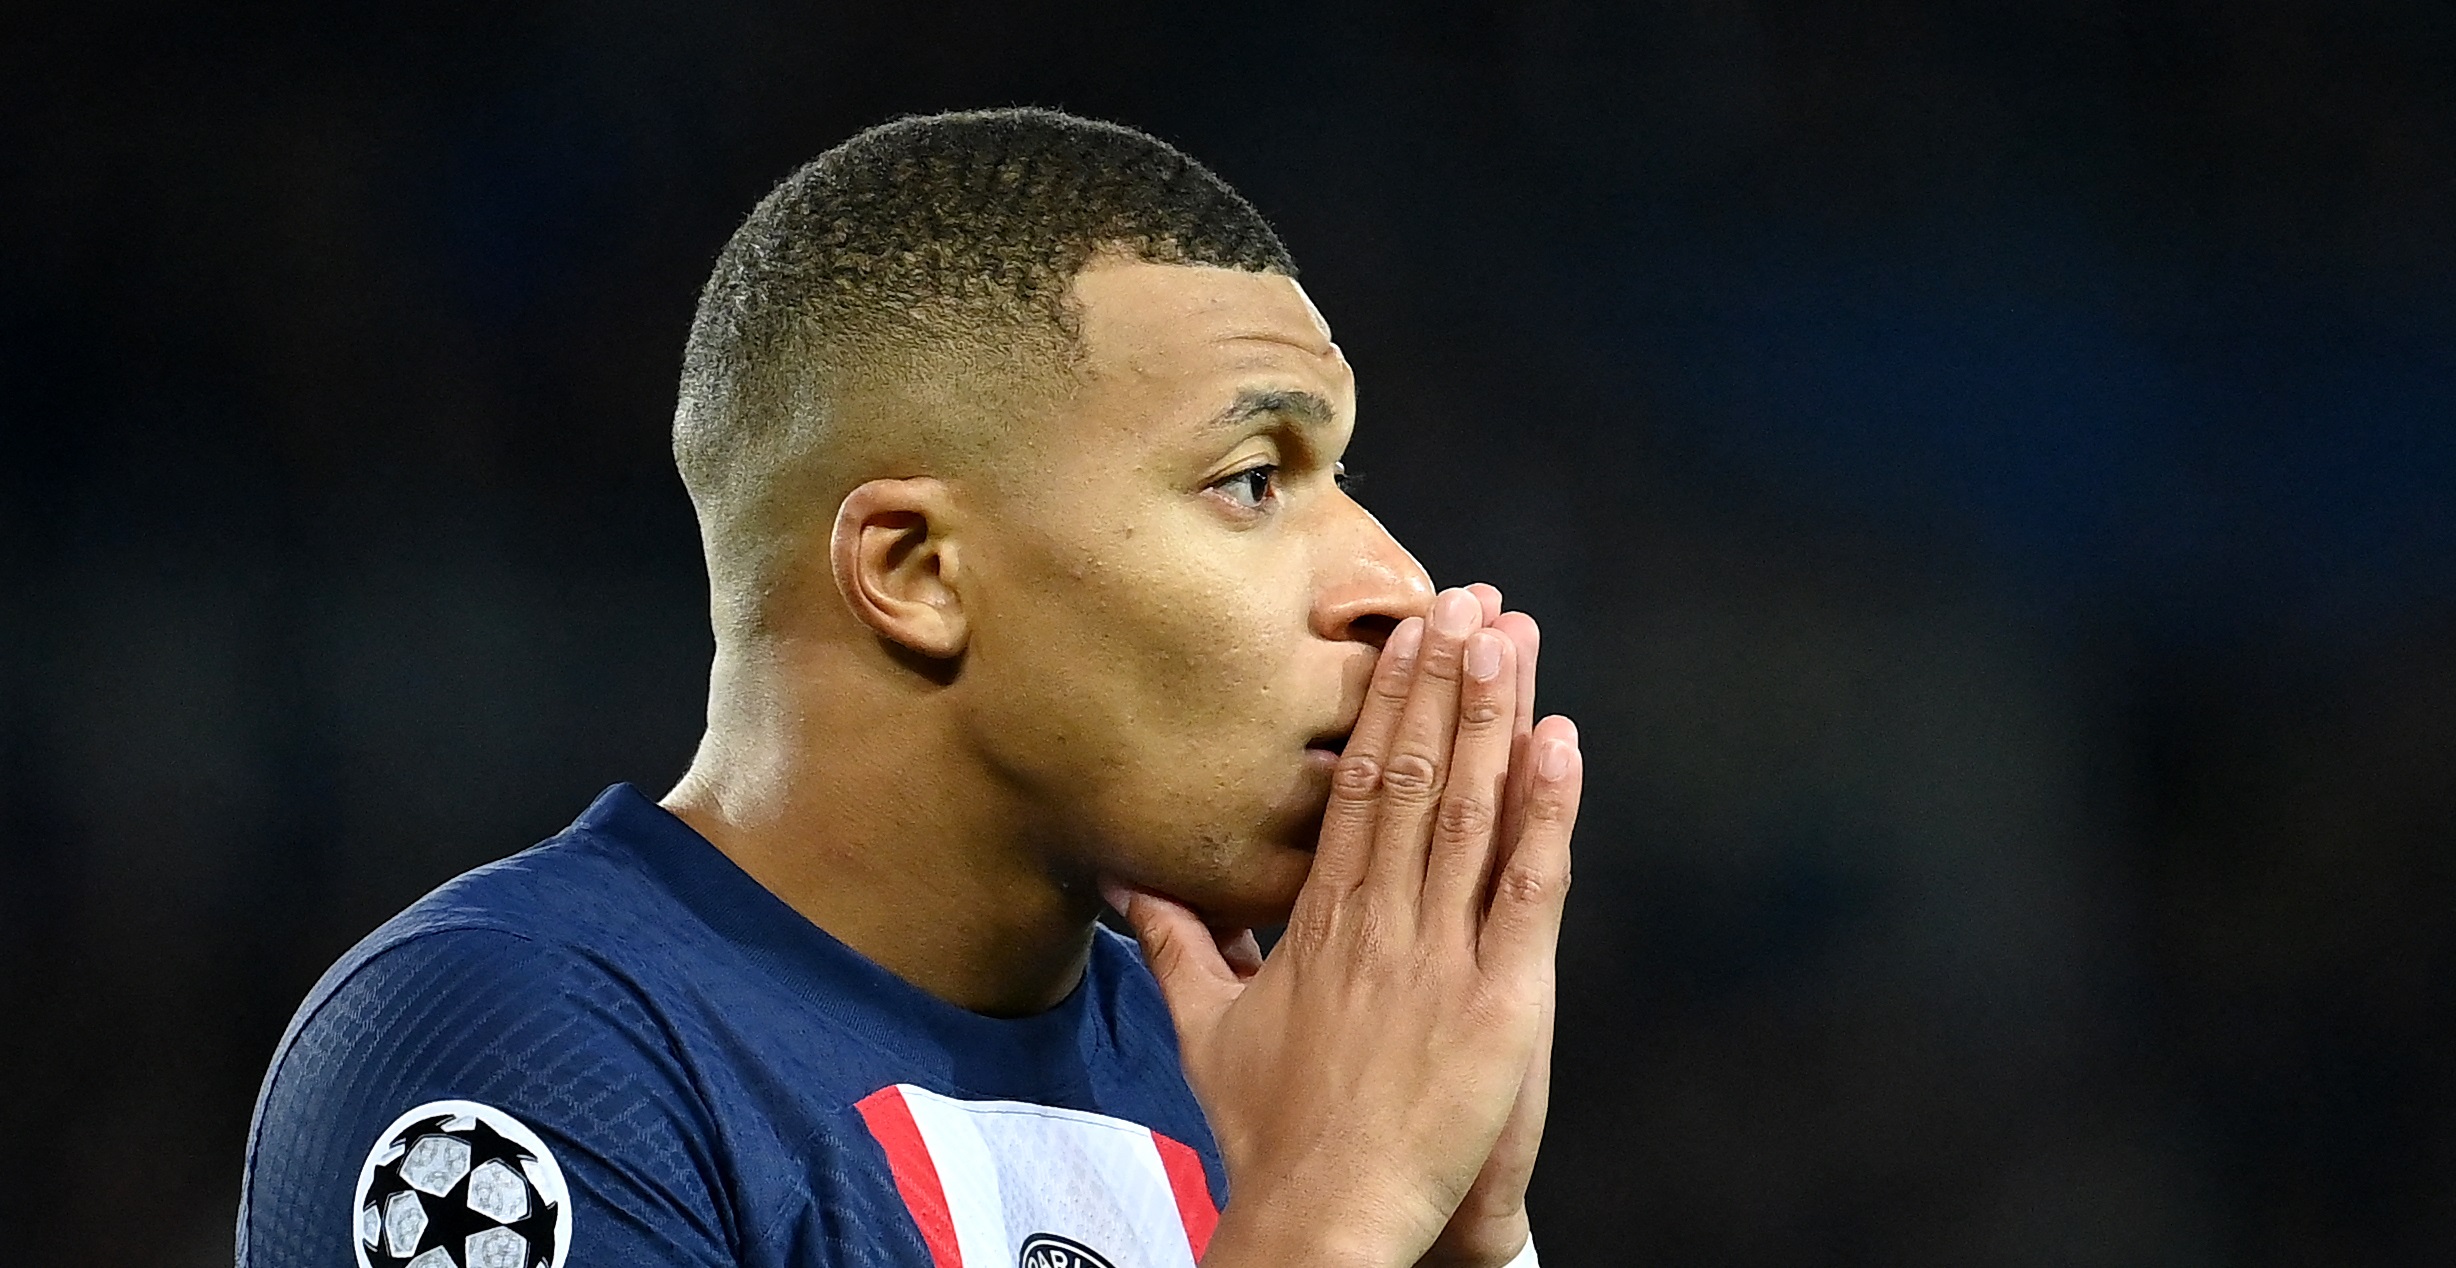 Exclusive: Mbappe ‘bluff’ explained as Liverpool told they must break transfer tradition ‘to get him’